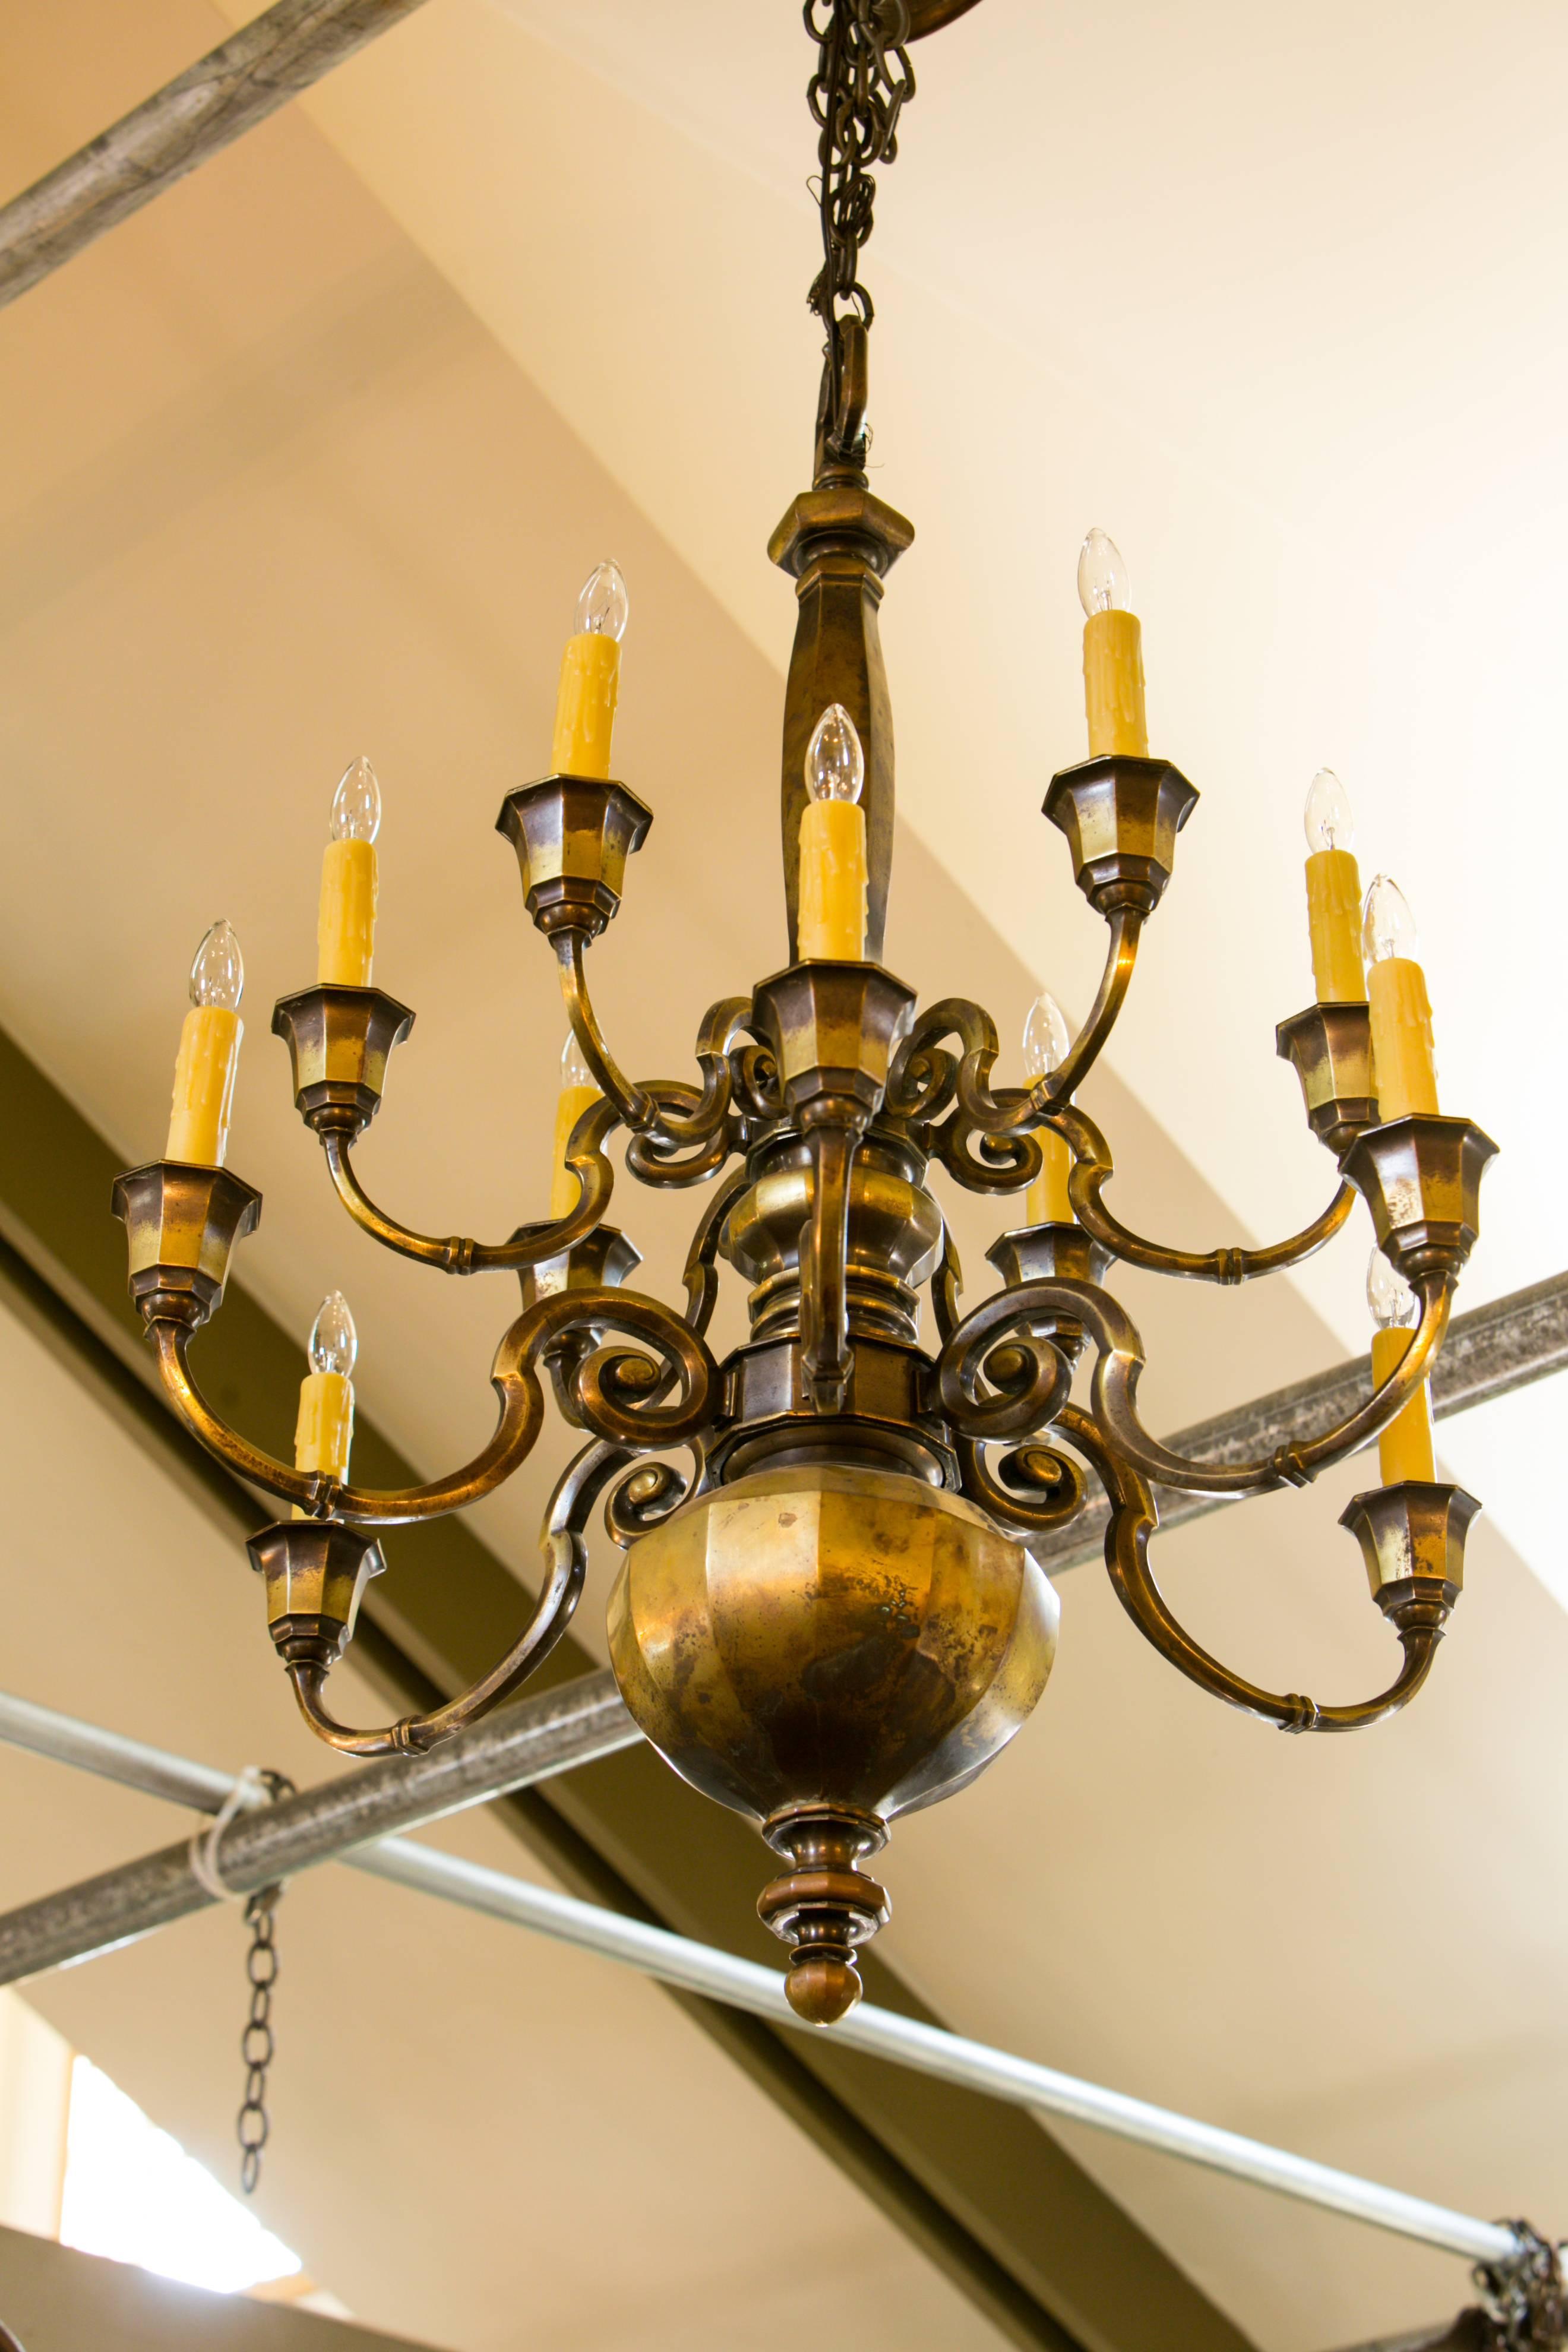 This two-tier chandelier has beautiful bronze iron casting and unusual shape, circa 1900. Newly wired in the US with all UL listed parts and 12 sockets, six on each tier. Comes with chain and canopy.